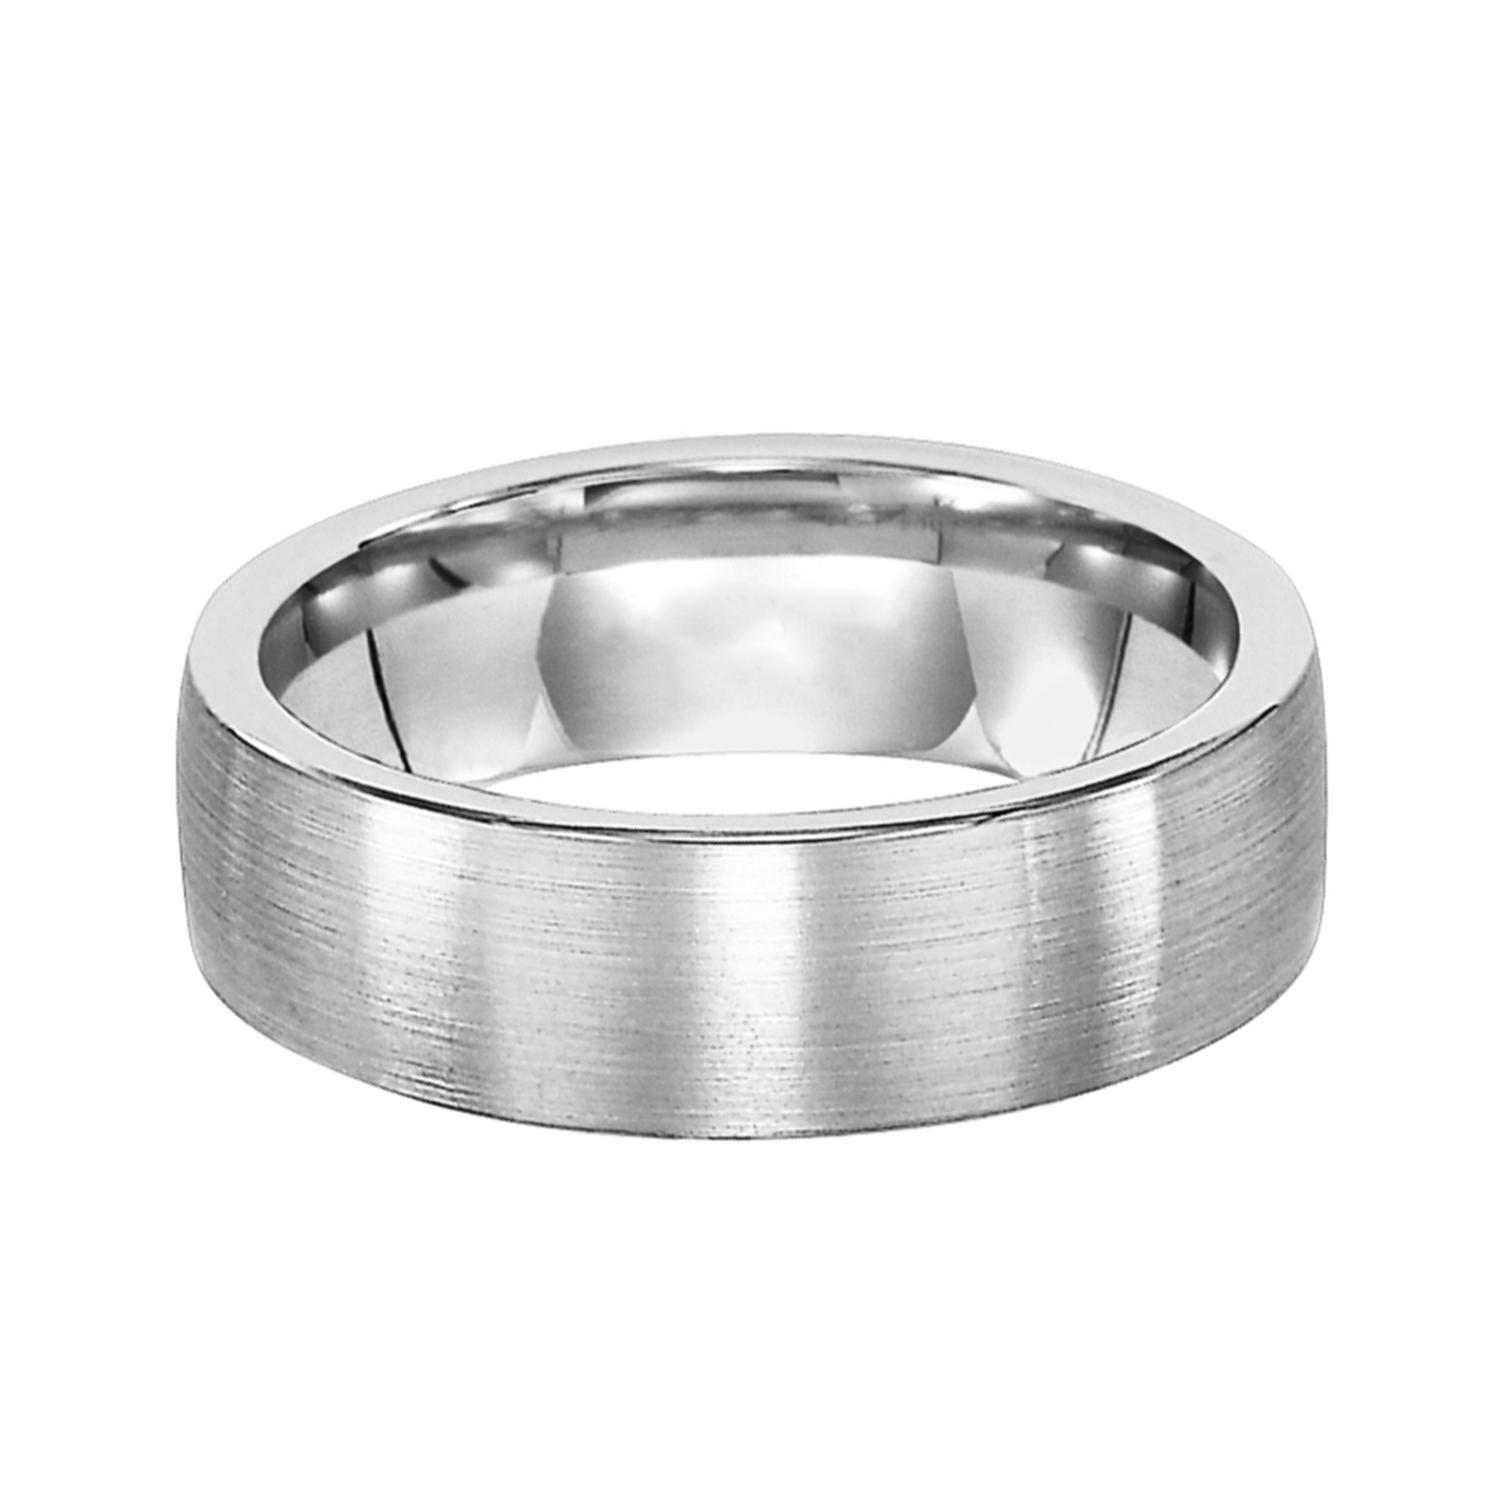 Gents 14K White Gold Wedding Band with Rolled Edge